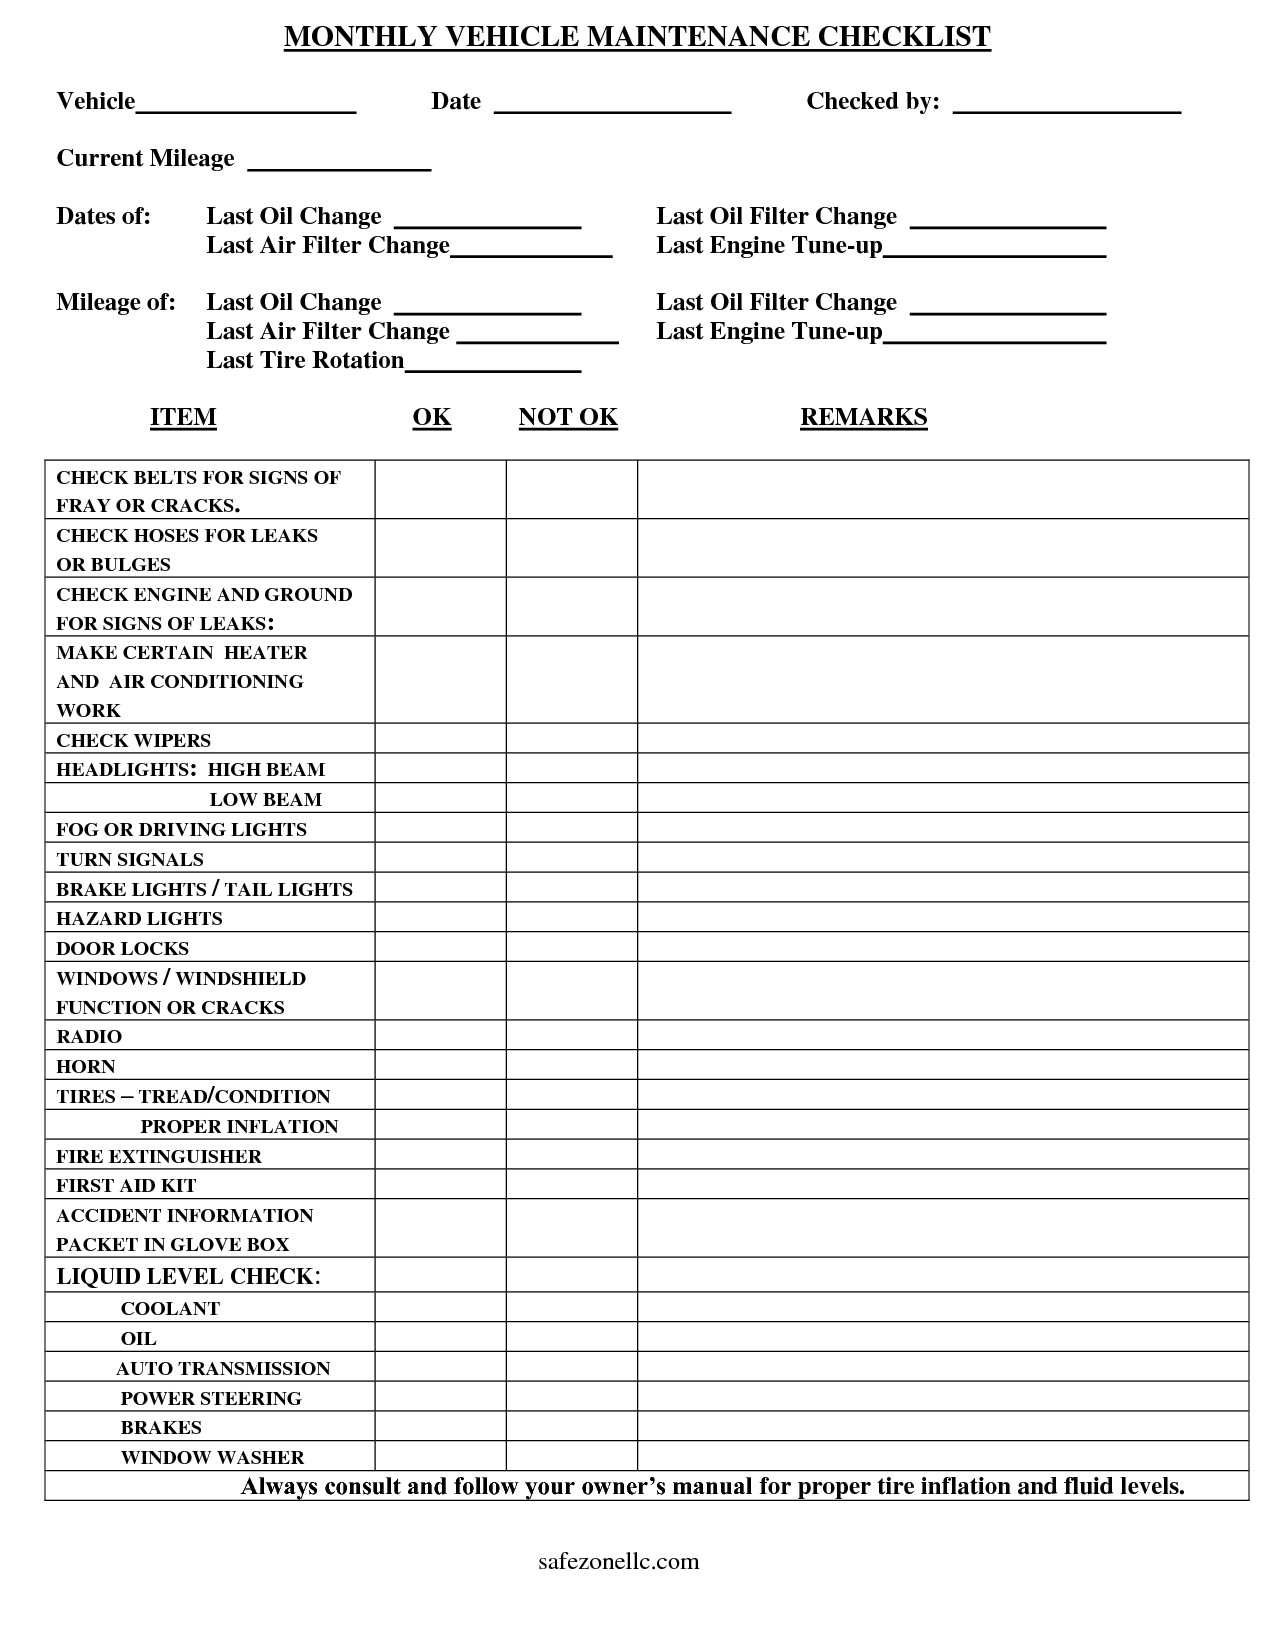 Vehicle Checklist Template MONTHLY VEHICLE MAINTENANCE CHECKLIST Document Car Maintenance Spreadsheet